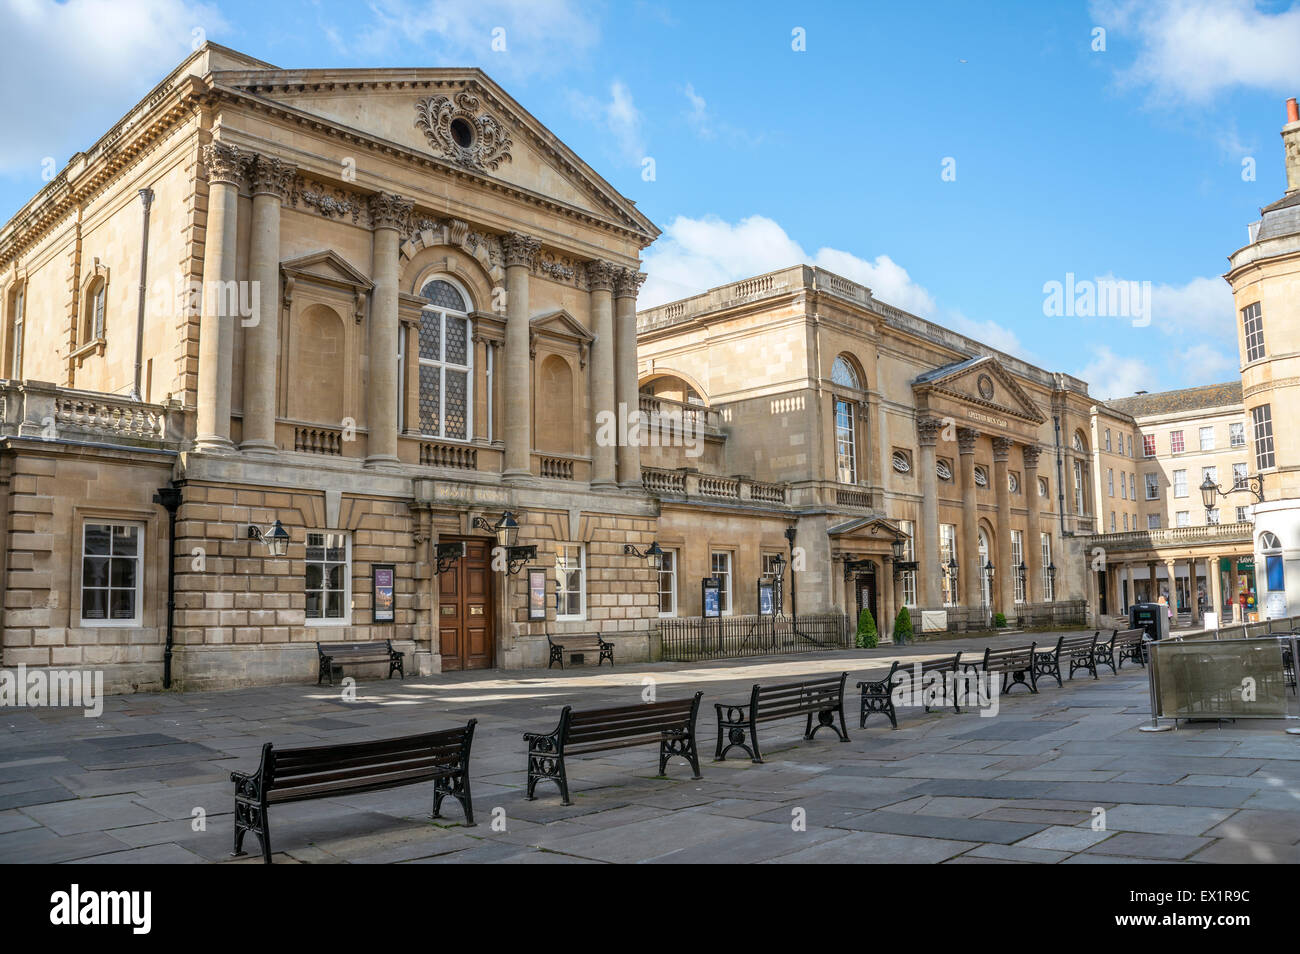 The Roman Baths complex, a site of historical interest in the English city of Bath, Somerset, England. Stock Photo